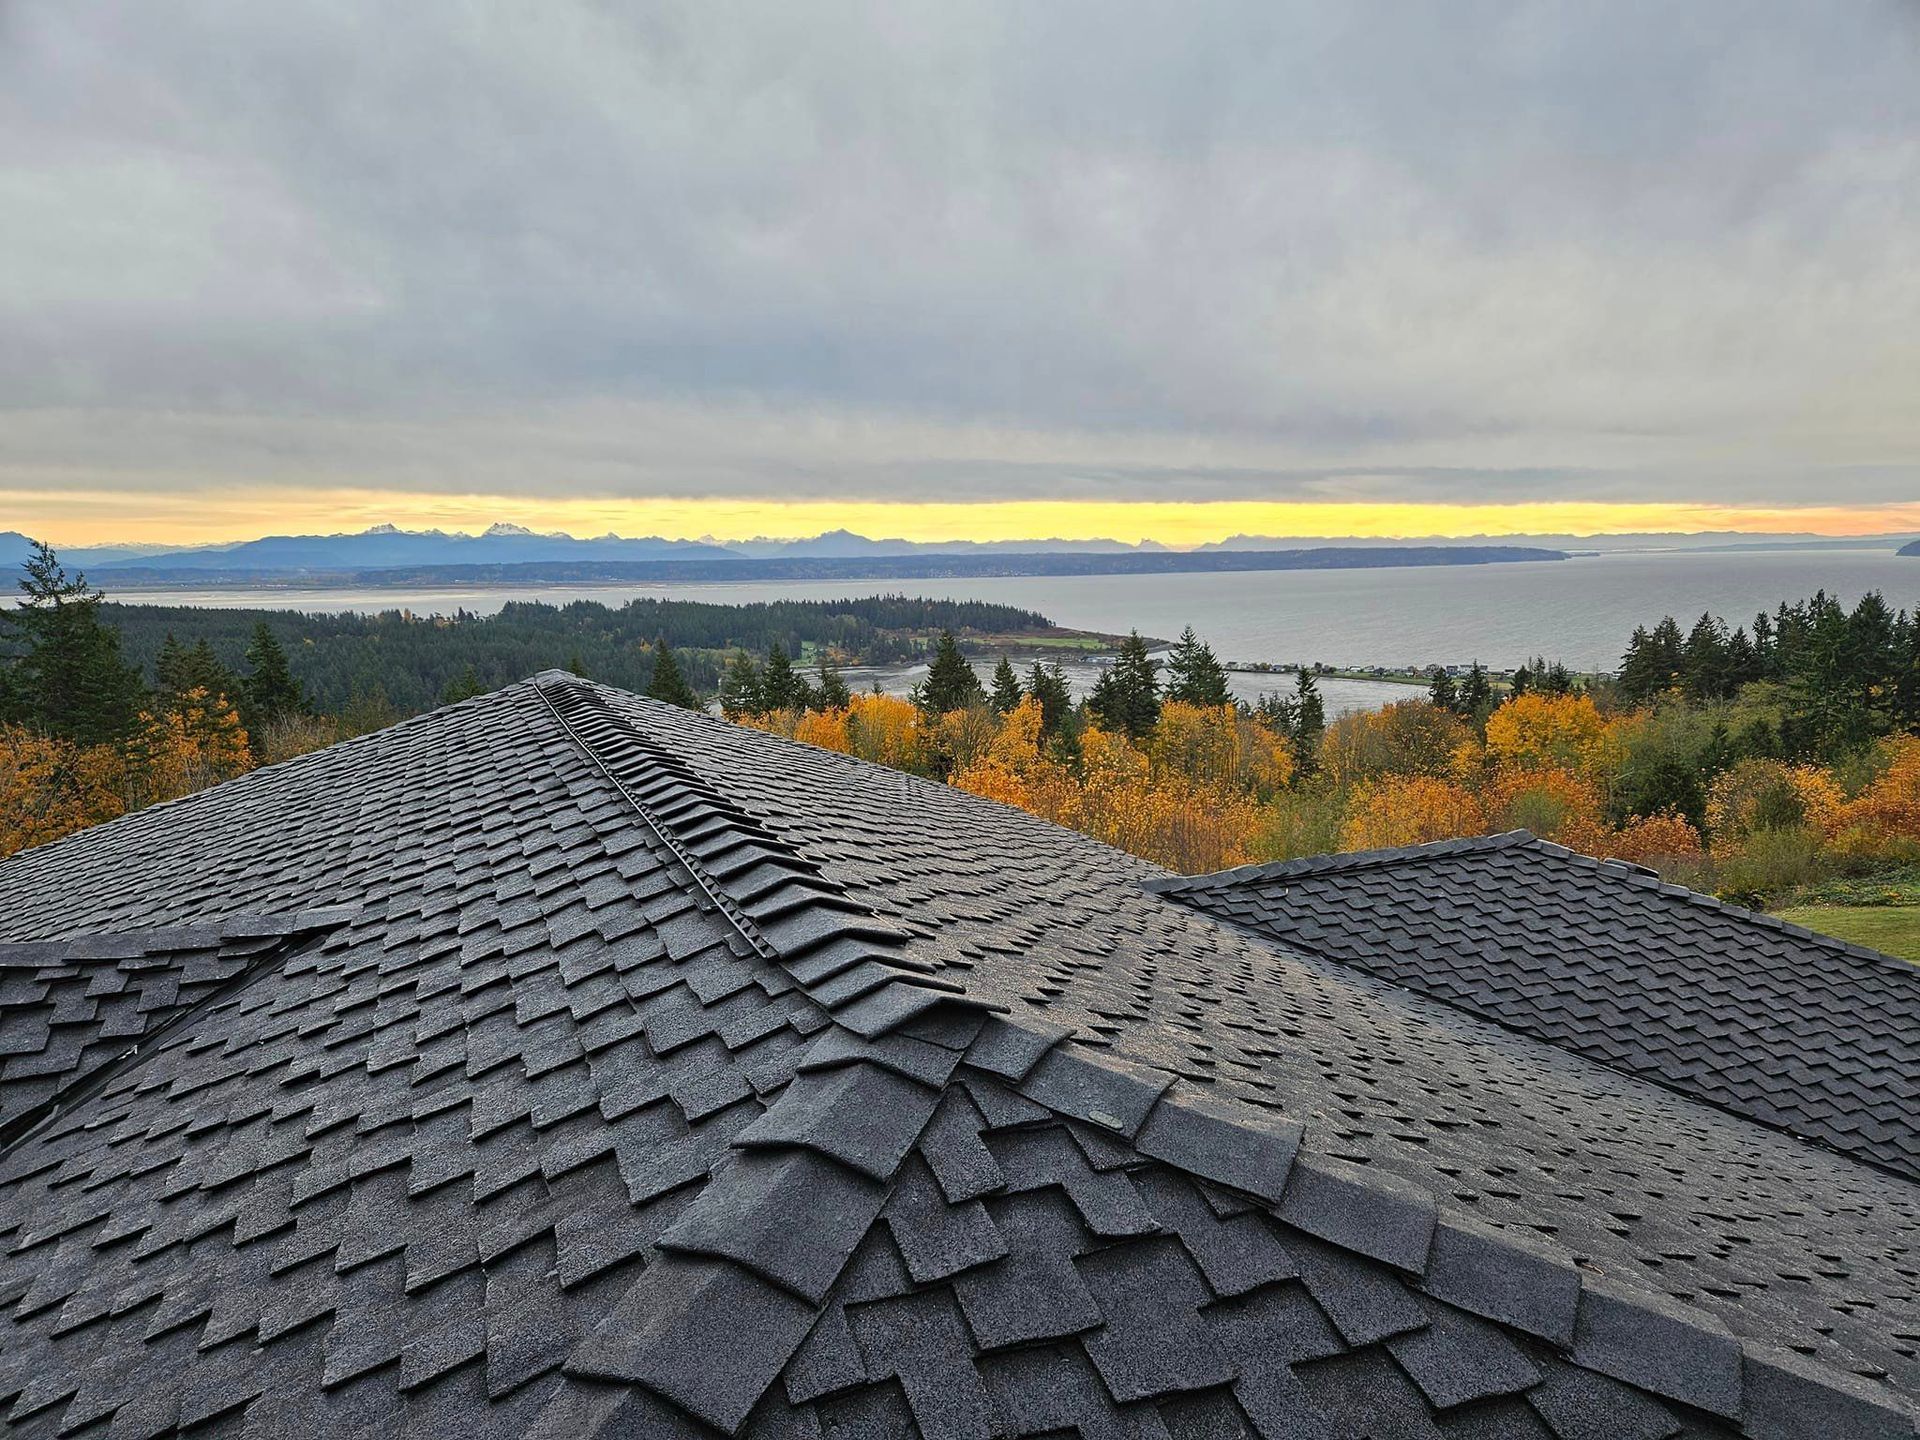 The roof of a house with a view of the ocean and mountains from Washington Roofing Services near Arlington WA